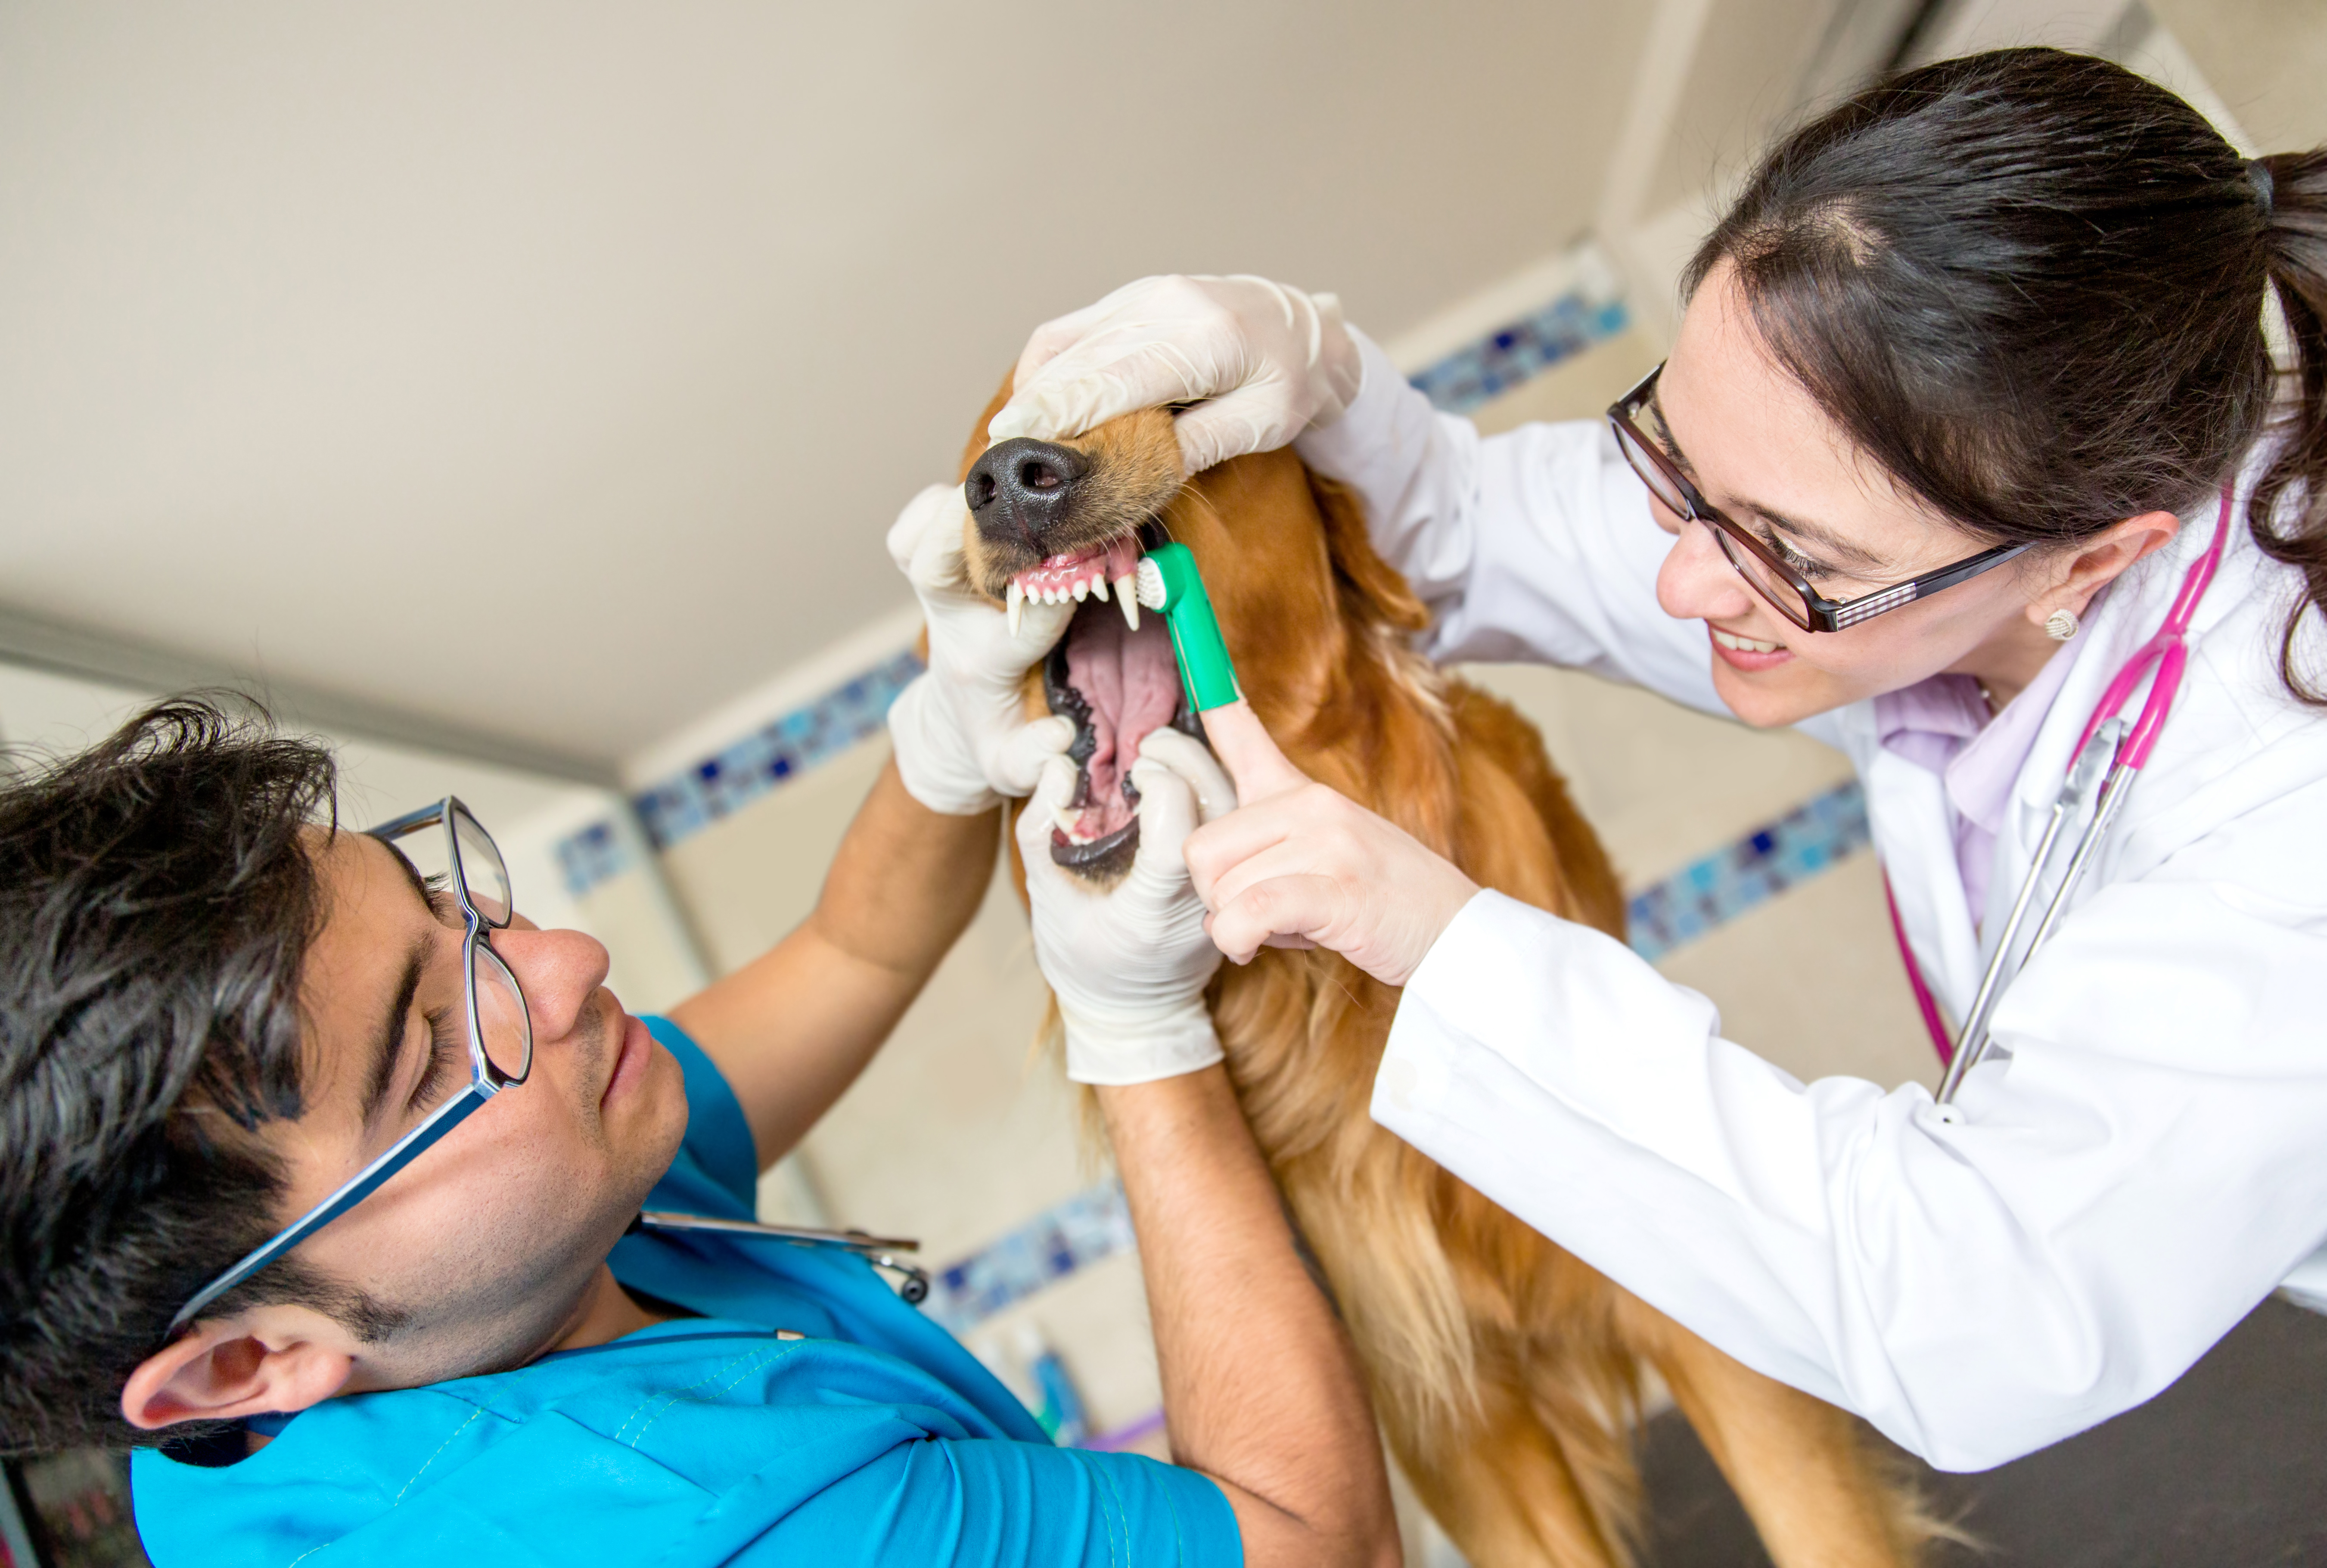 Vet cleaning teeth of a dog with a brush